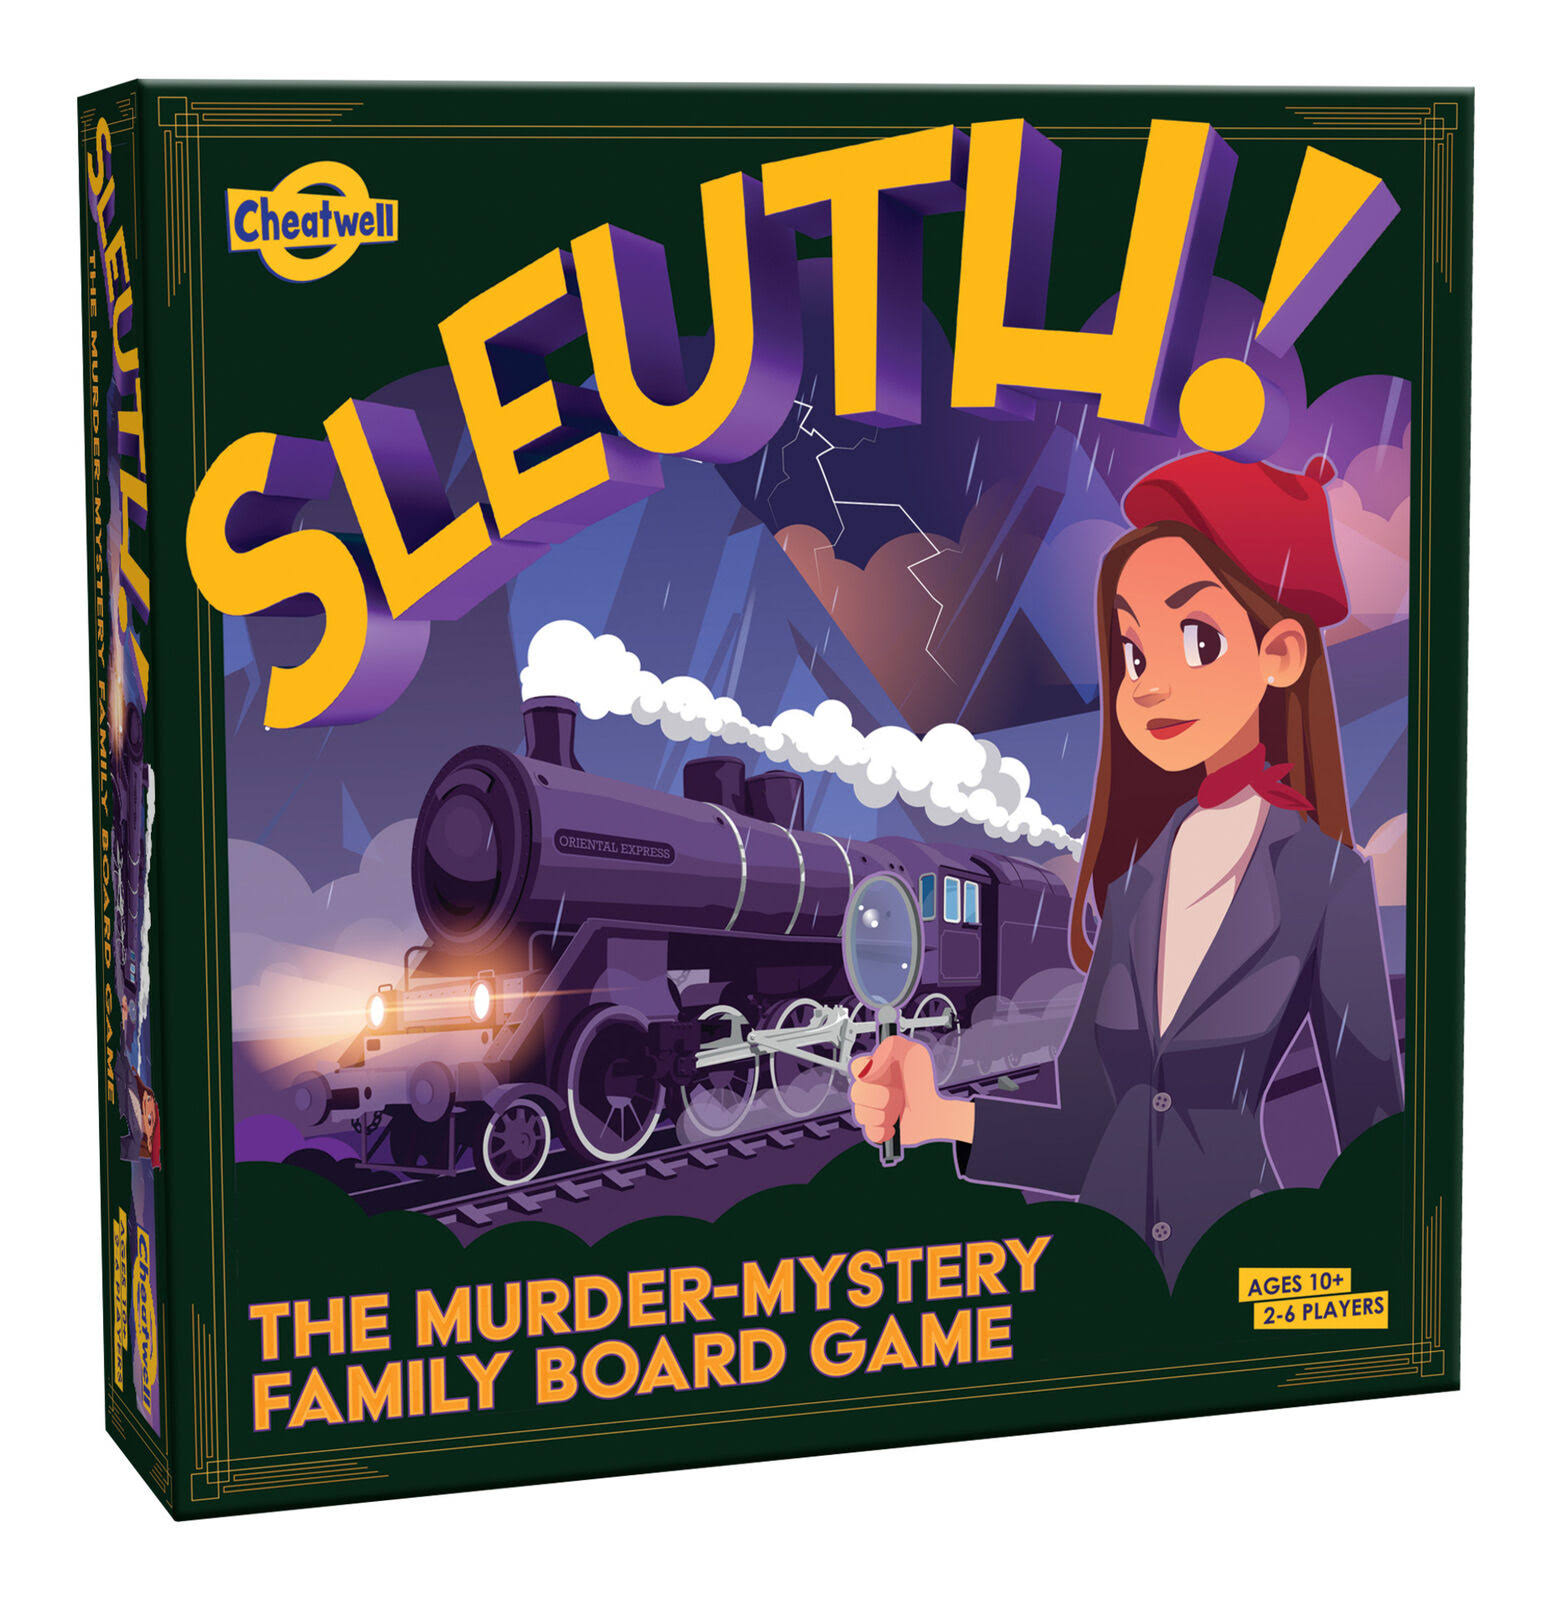 Sleuth - Murder Mystery Family Board Game